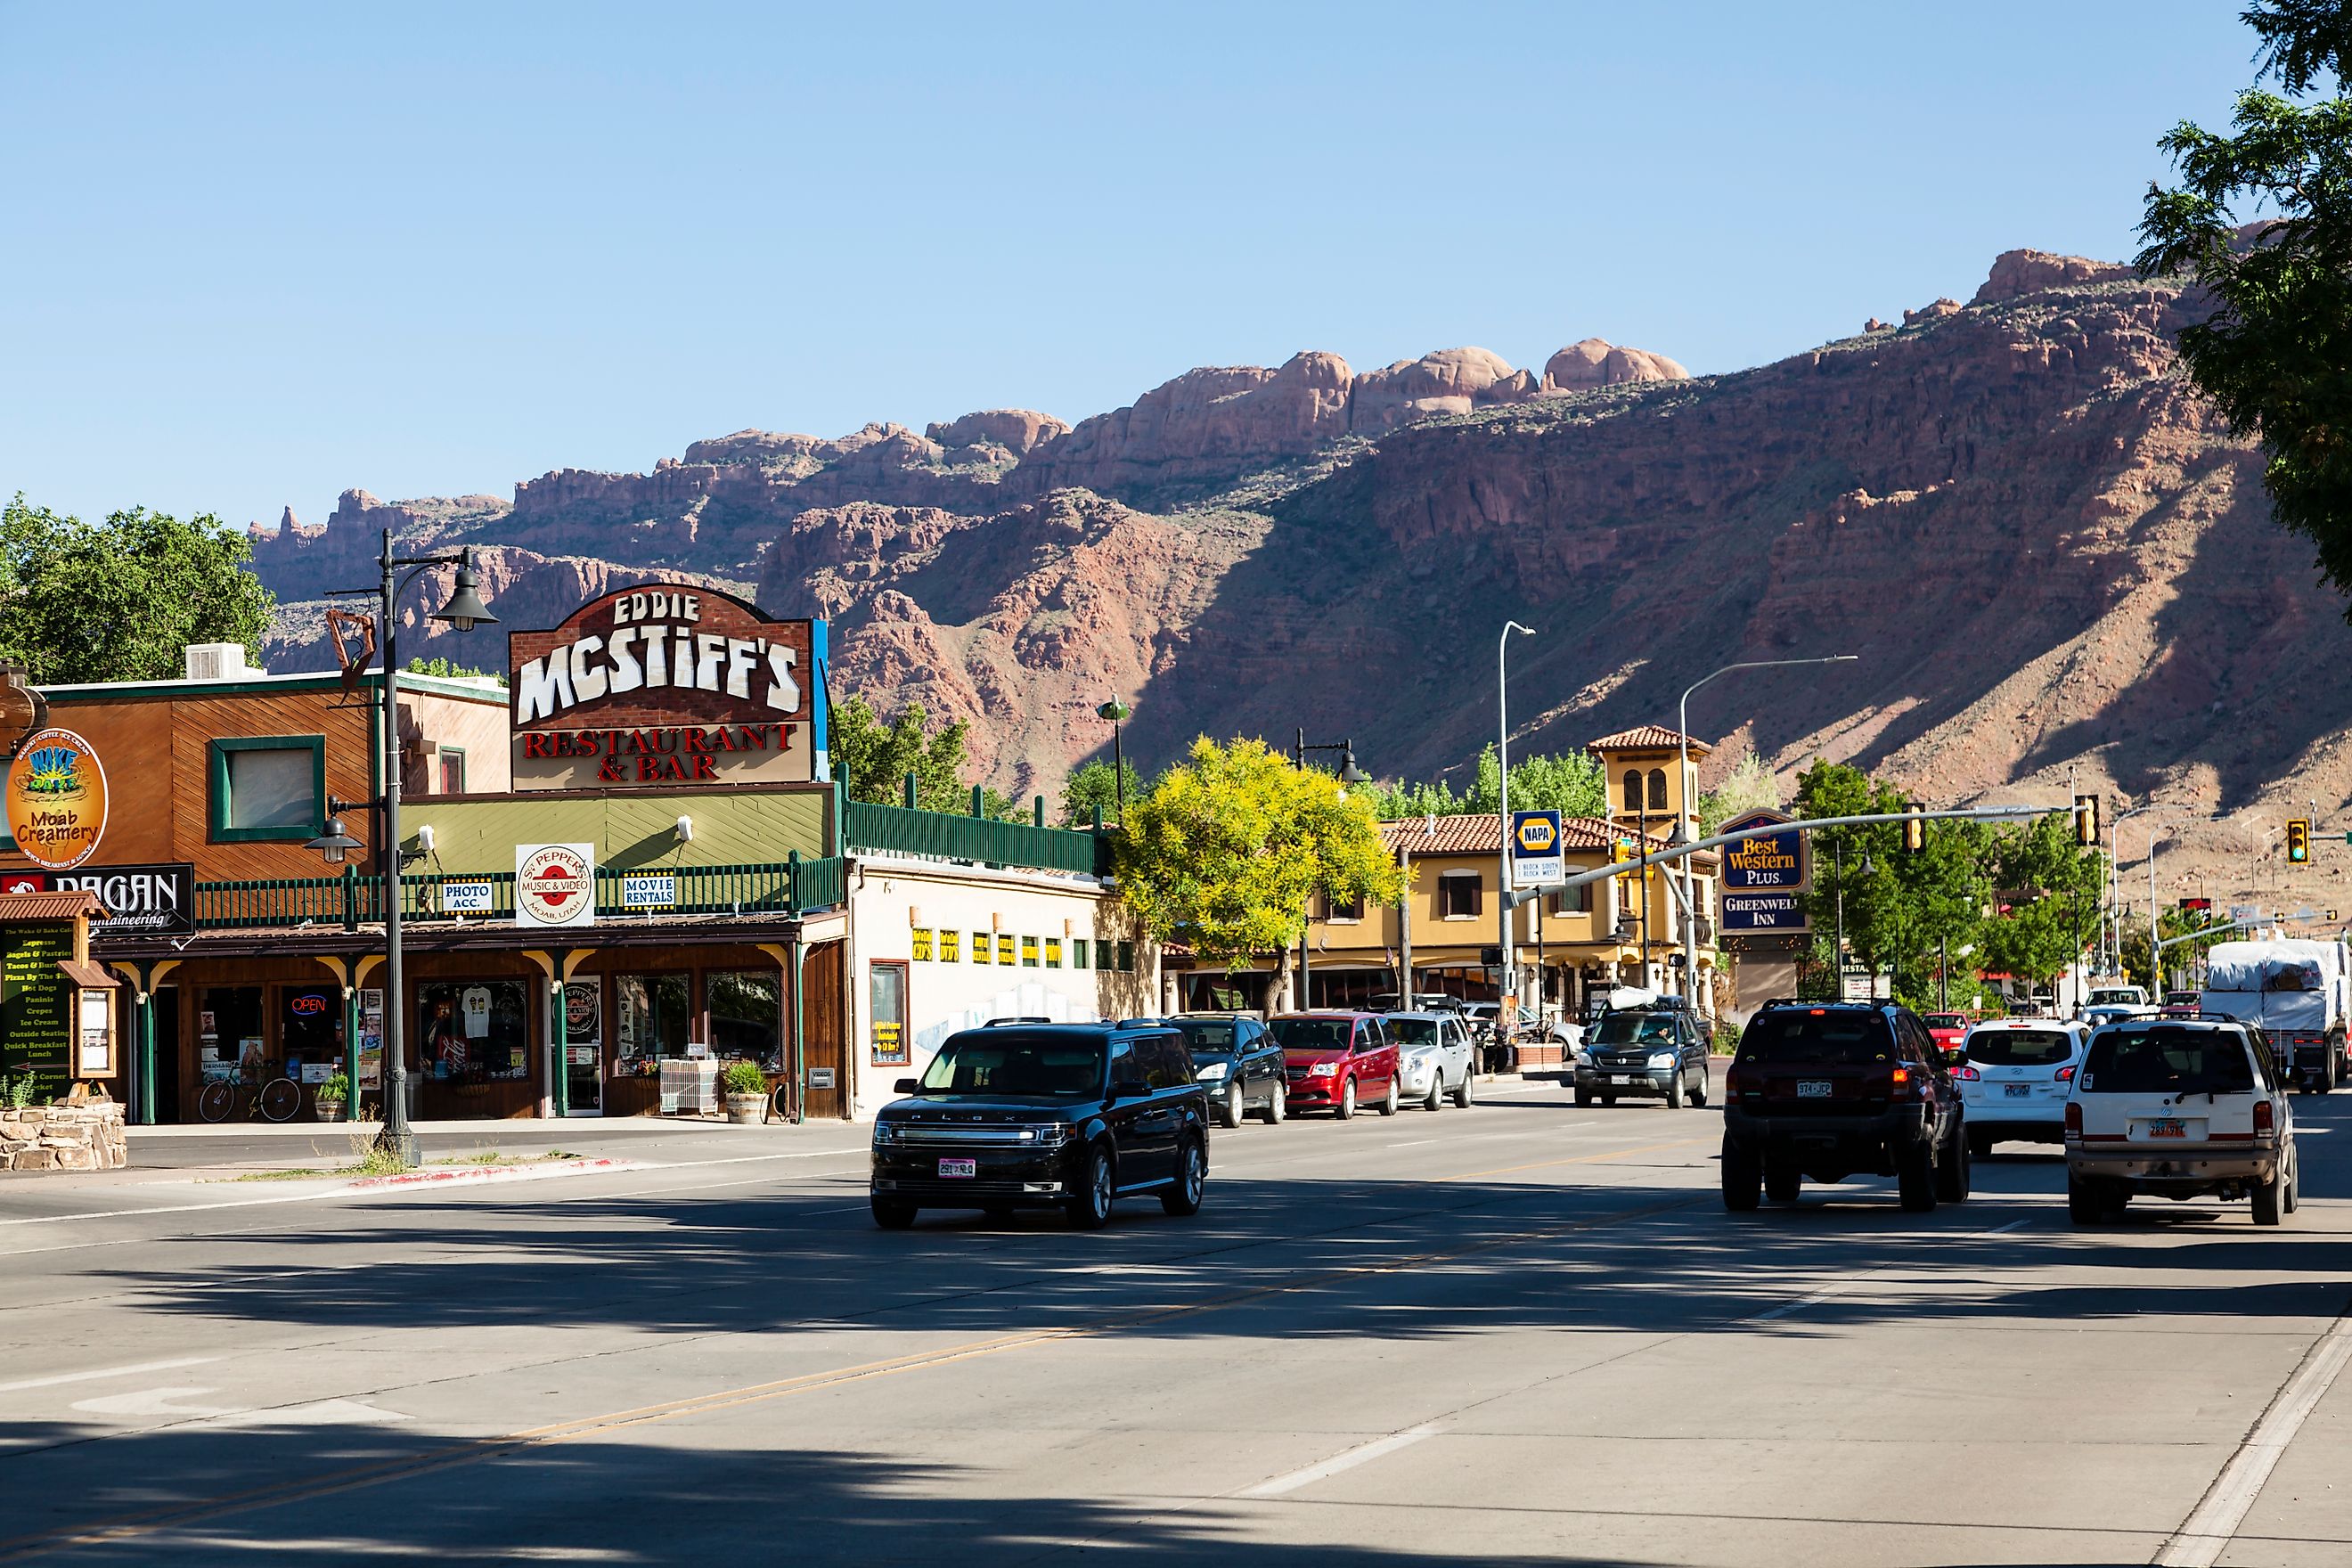 Store fronts, restaurant sign and street traffic at Main Street in Moab - Utah, popular destination for rock climbers and bikers, getaway to Arches National Park.